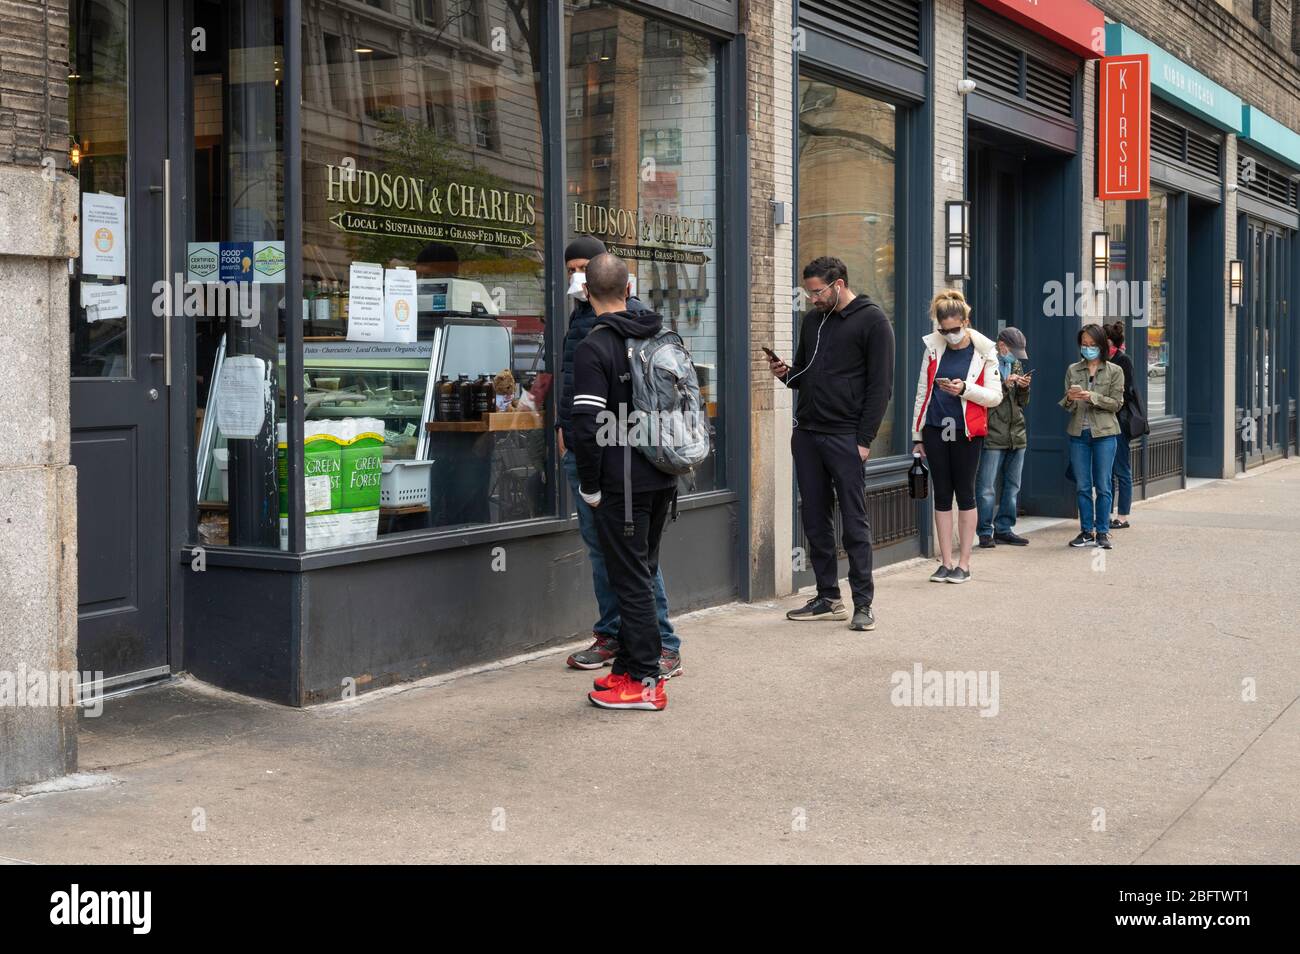 New York, NY, USA. April 19, 2020. People practicing social distancing as a result of the Coronavirus upbreak while on line outside of a butcher shop Stock Photo